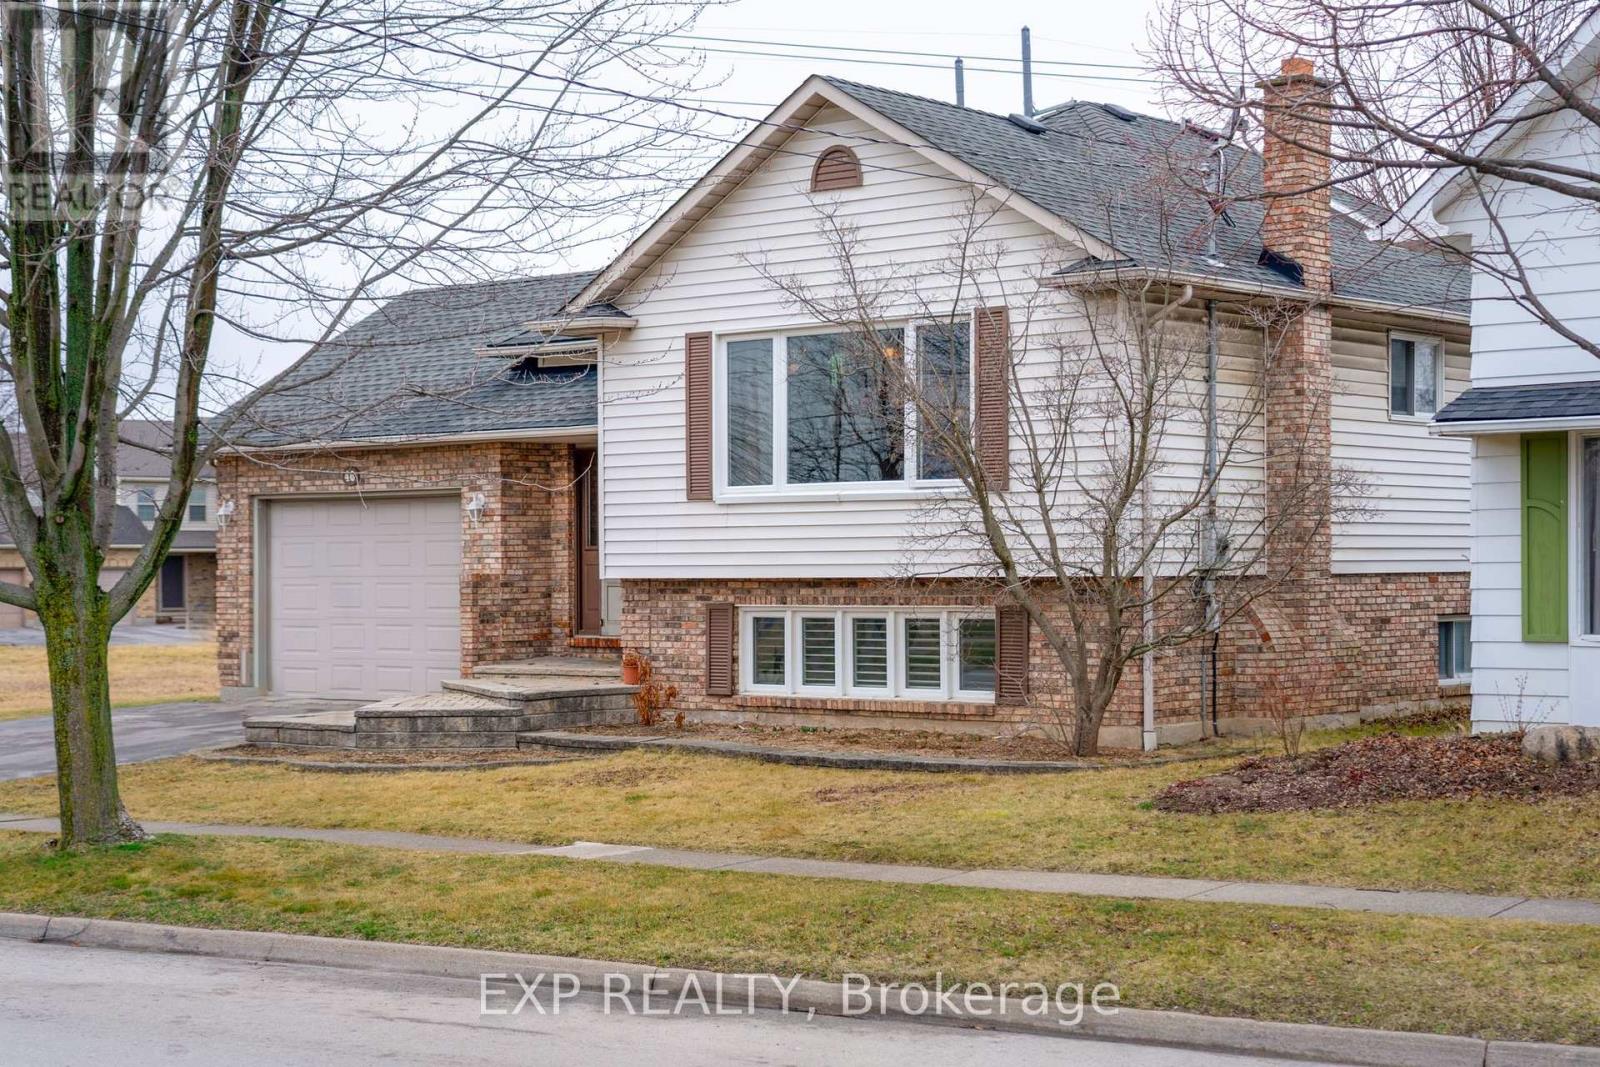 46 GRAPEVIEW DR, st. catharines, Ontario